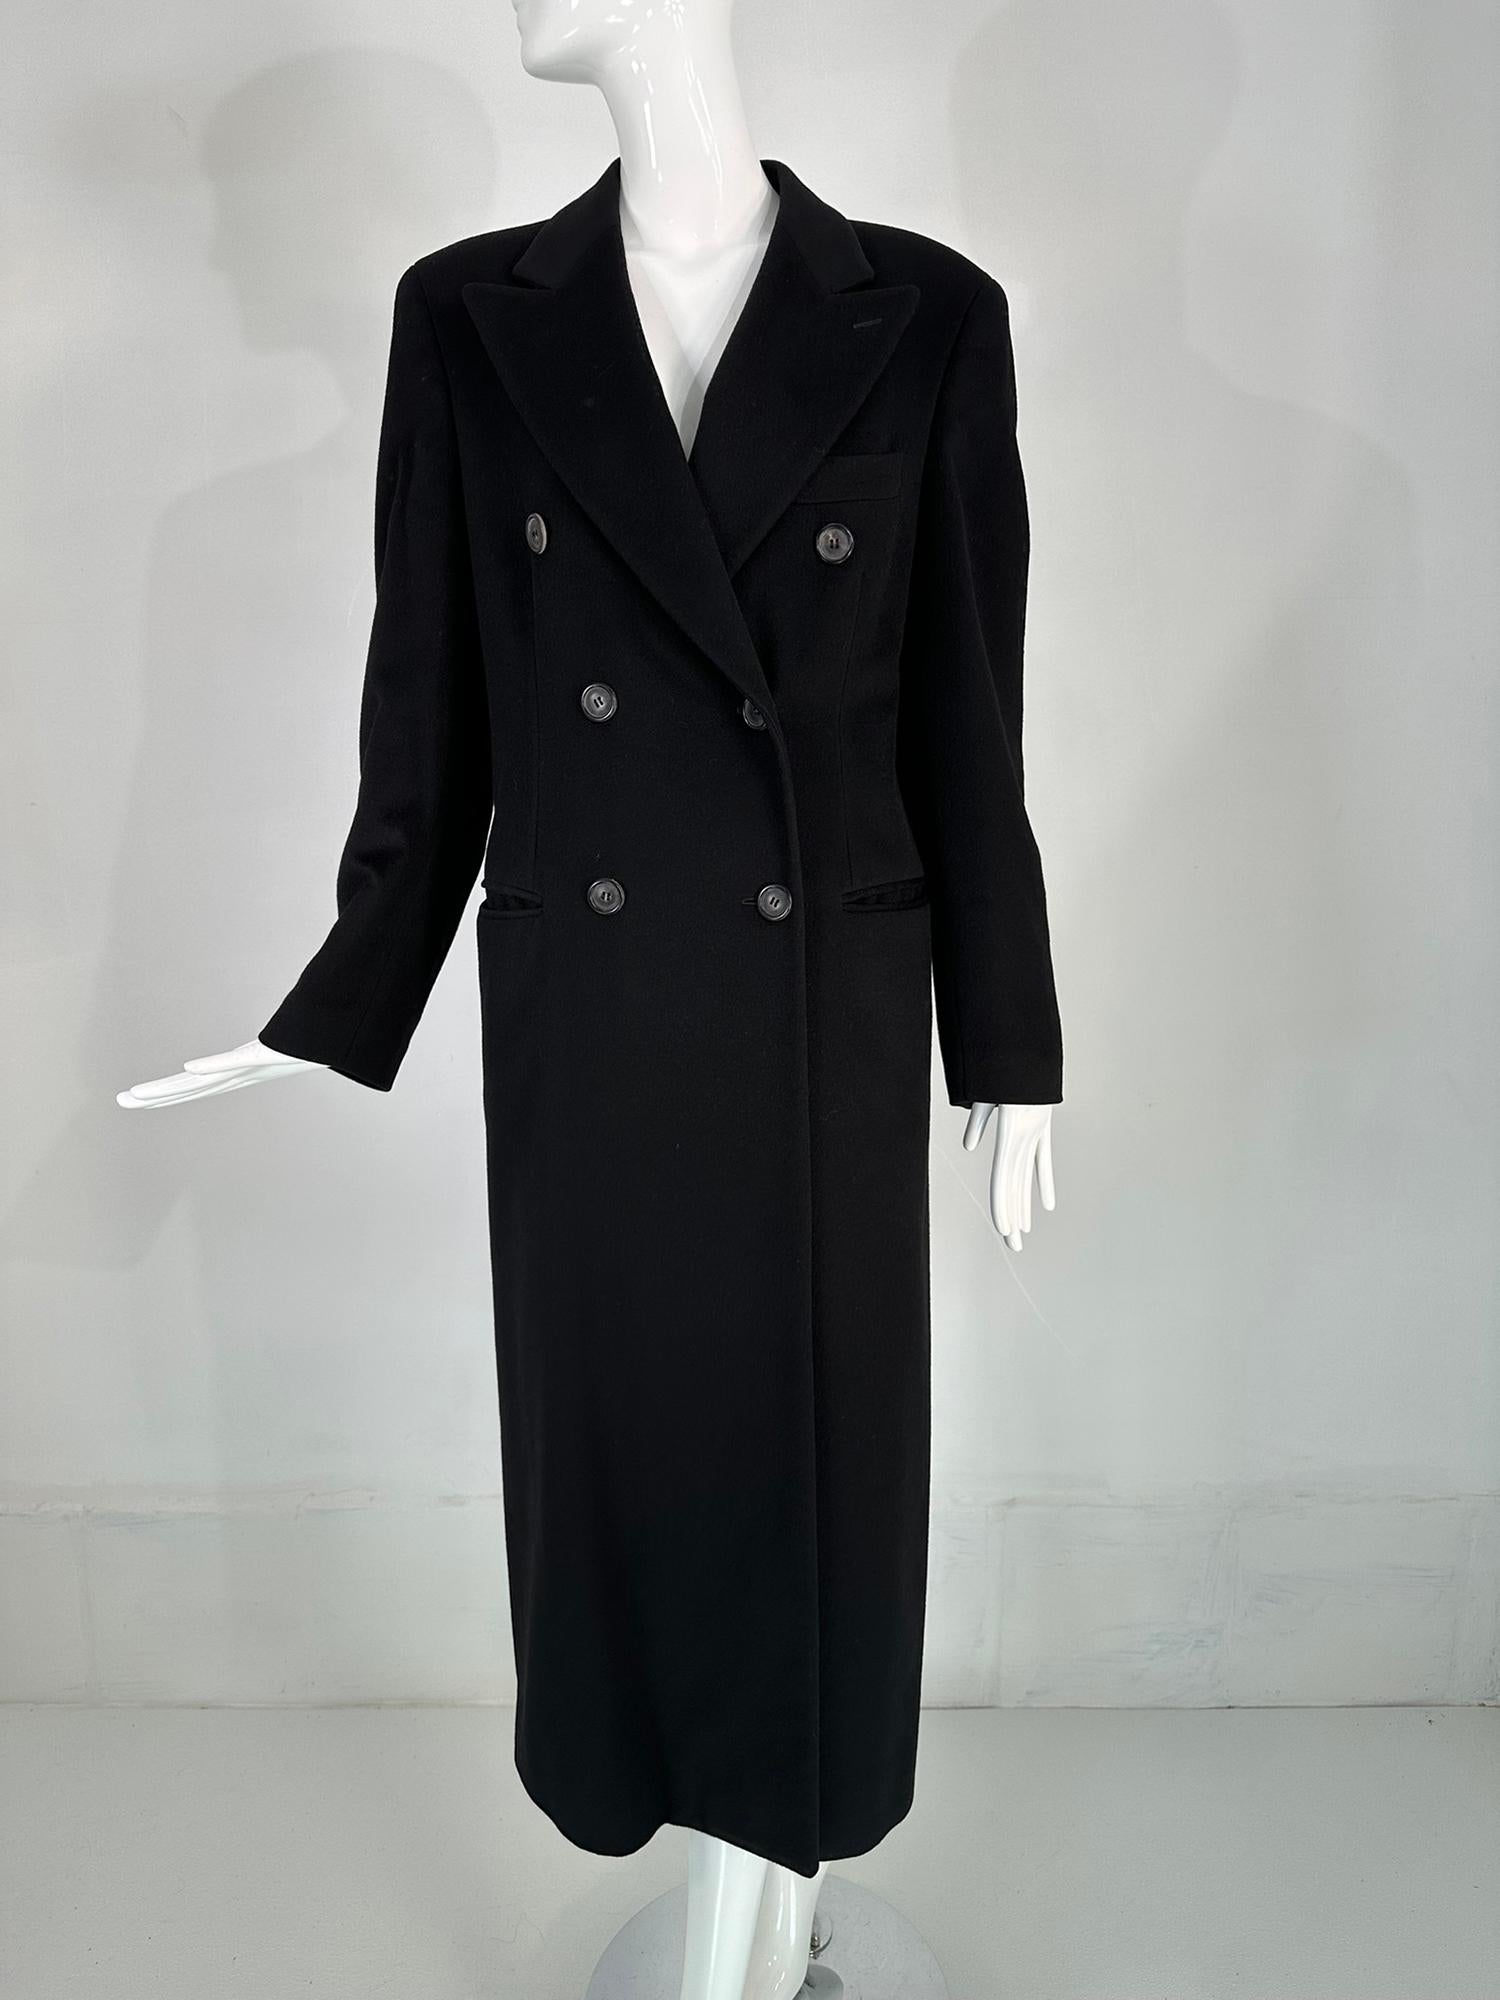 Giorgio Armani classico, black cashmere double breasted winter coat.  Styles come & go, but this beautiful coat will never go out of style, which is why we call it a classic. It will also go anywhere in style, from work to evening events or casual